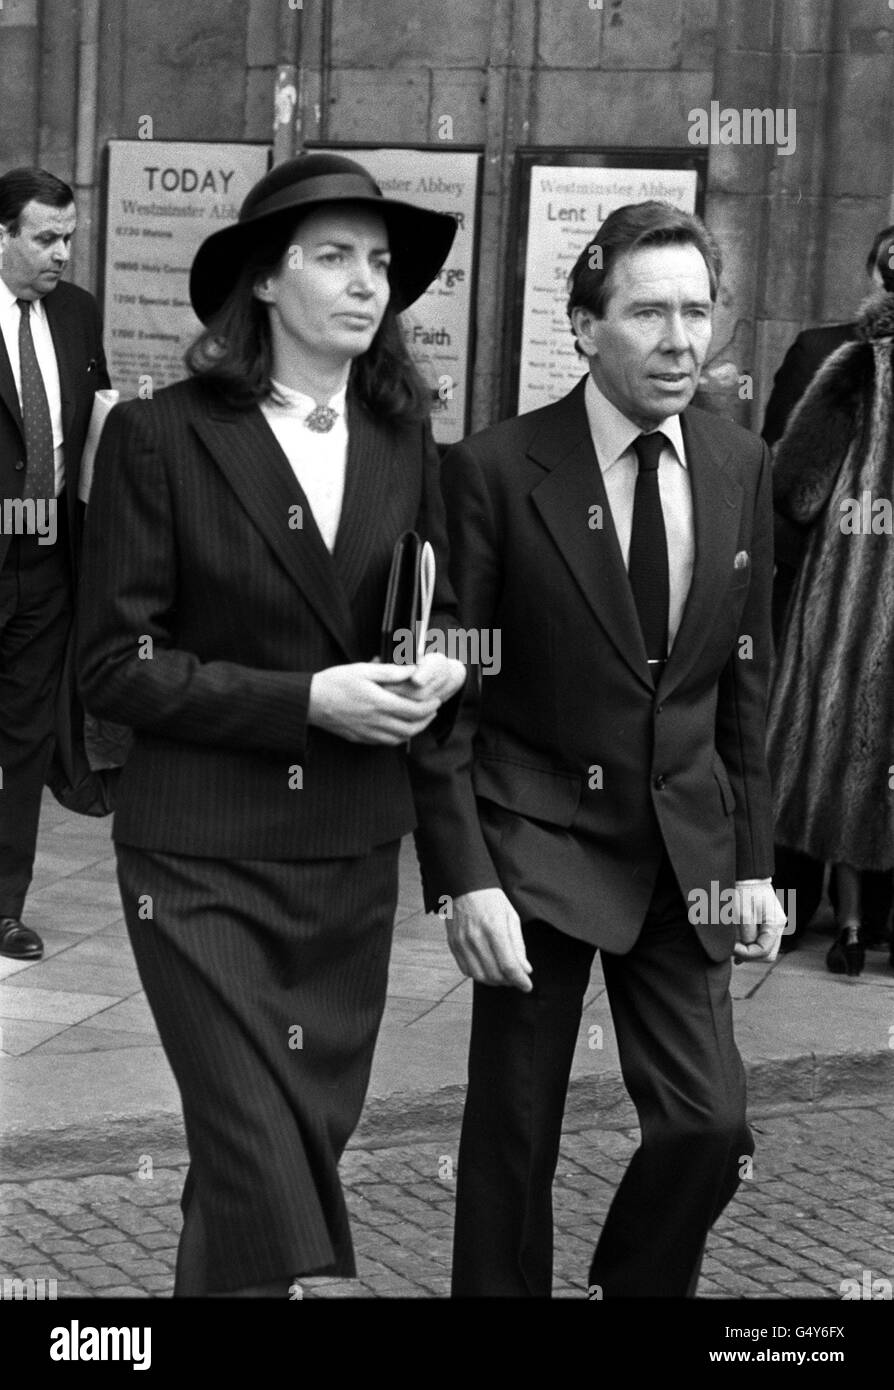 The Earl and Countess of Snowdon arrive at Westminister Abbey for the Memorial Service to Lord Harlech. The earl's first wife - the Princess Margaret- also attended. Stock Photo